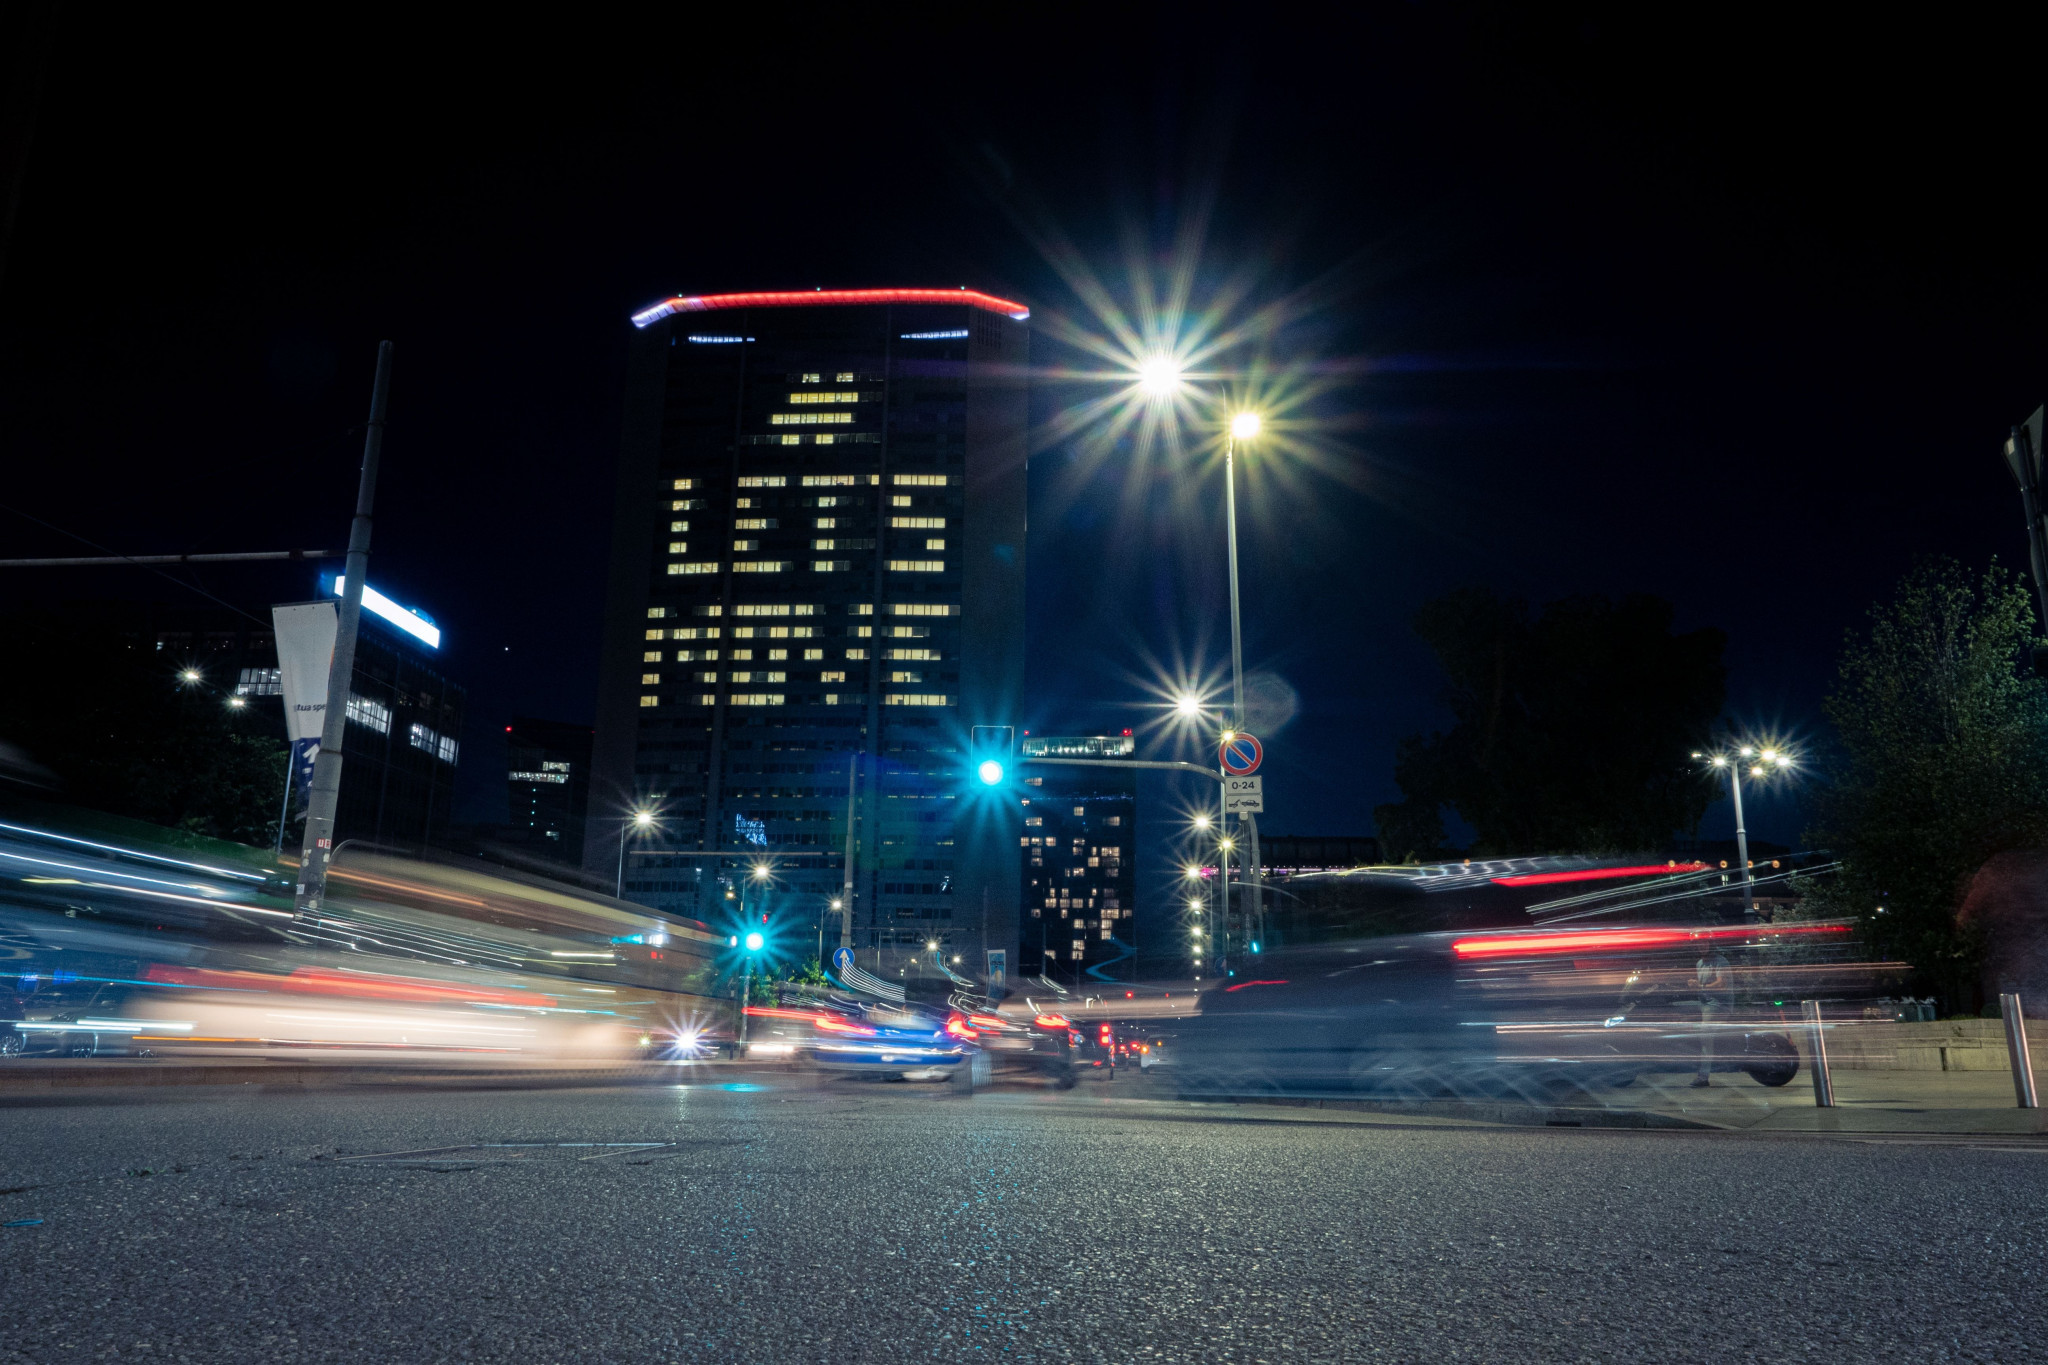 Pirelli Tower lights up with "Let’s Move" as Milan Cortina 2026 mark Olympic Day